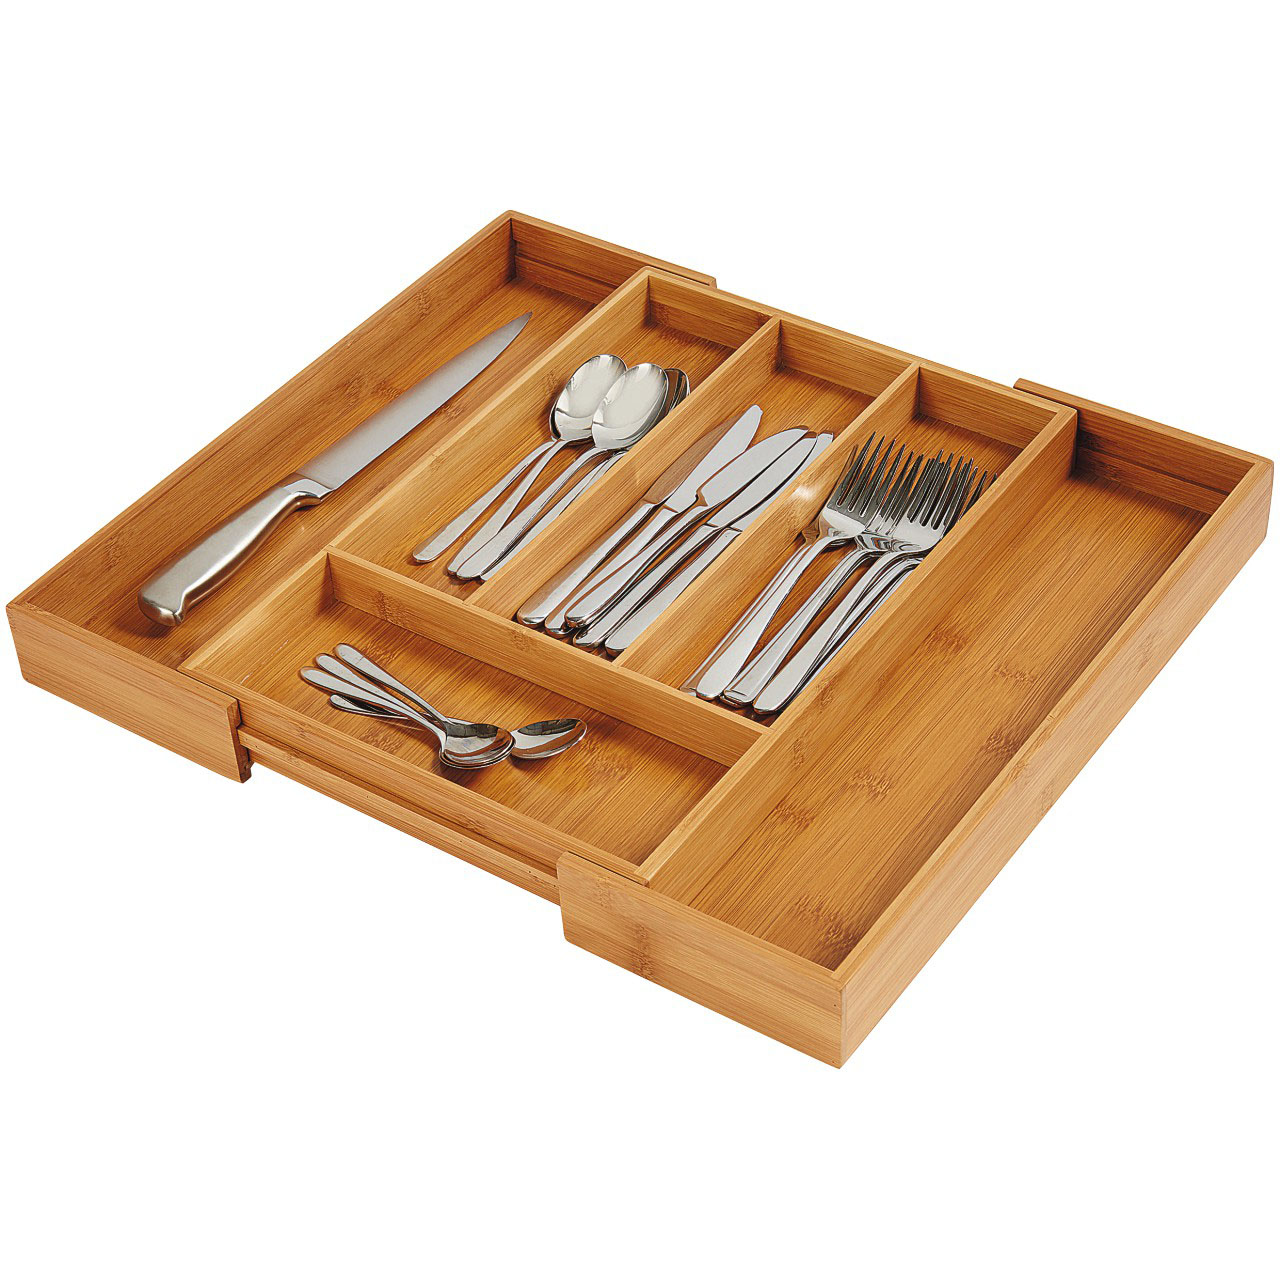 Wooden Expanding Cutlery Tray